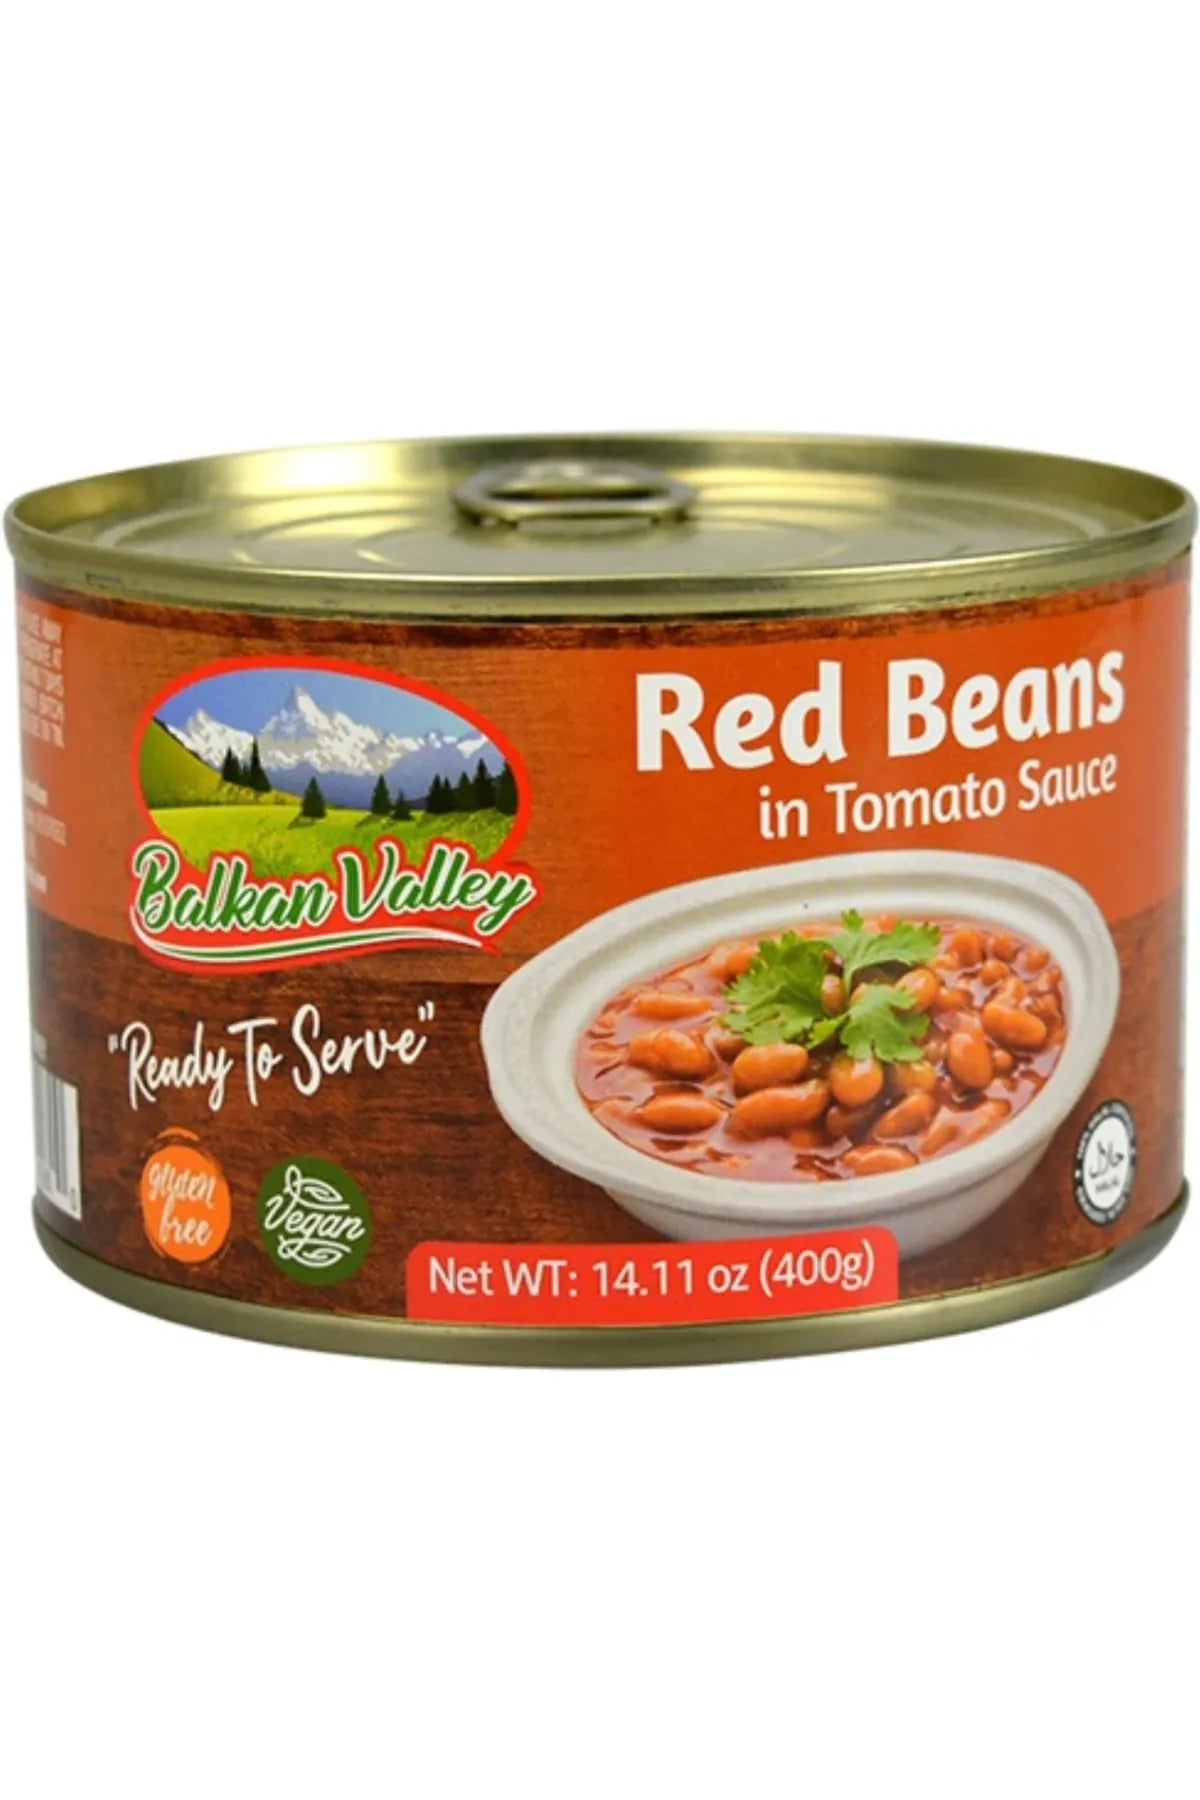 Ready to Serve - Red Beans in Tomato Sauce - Balkan Valley